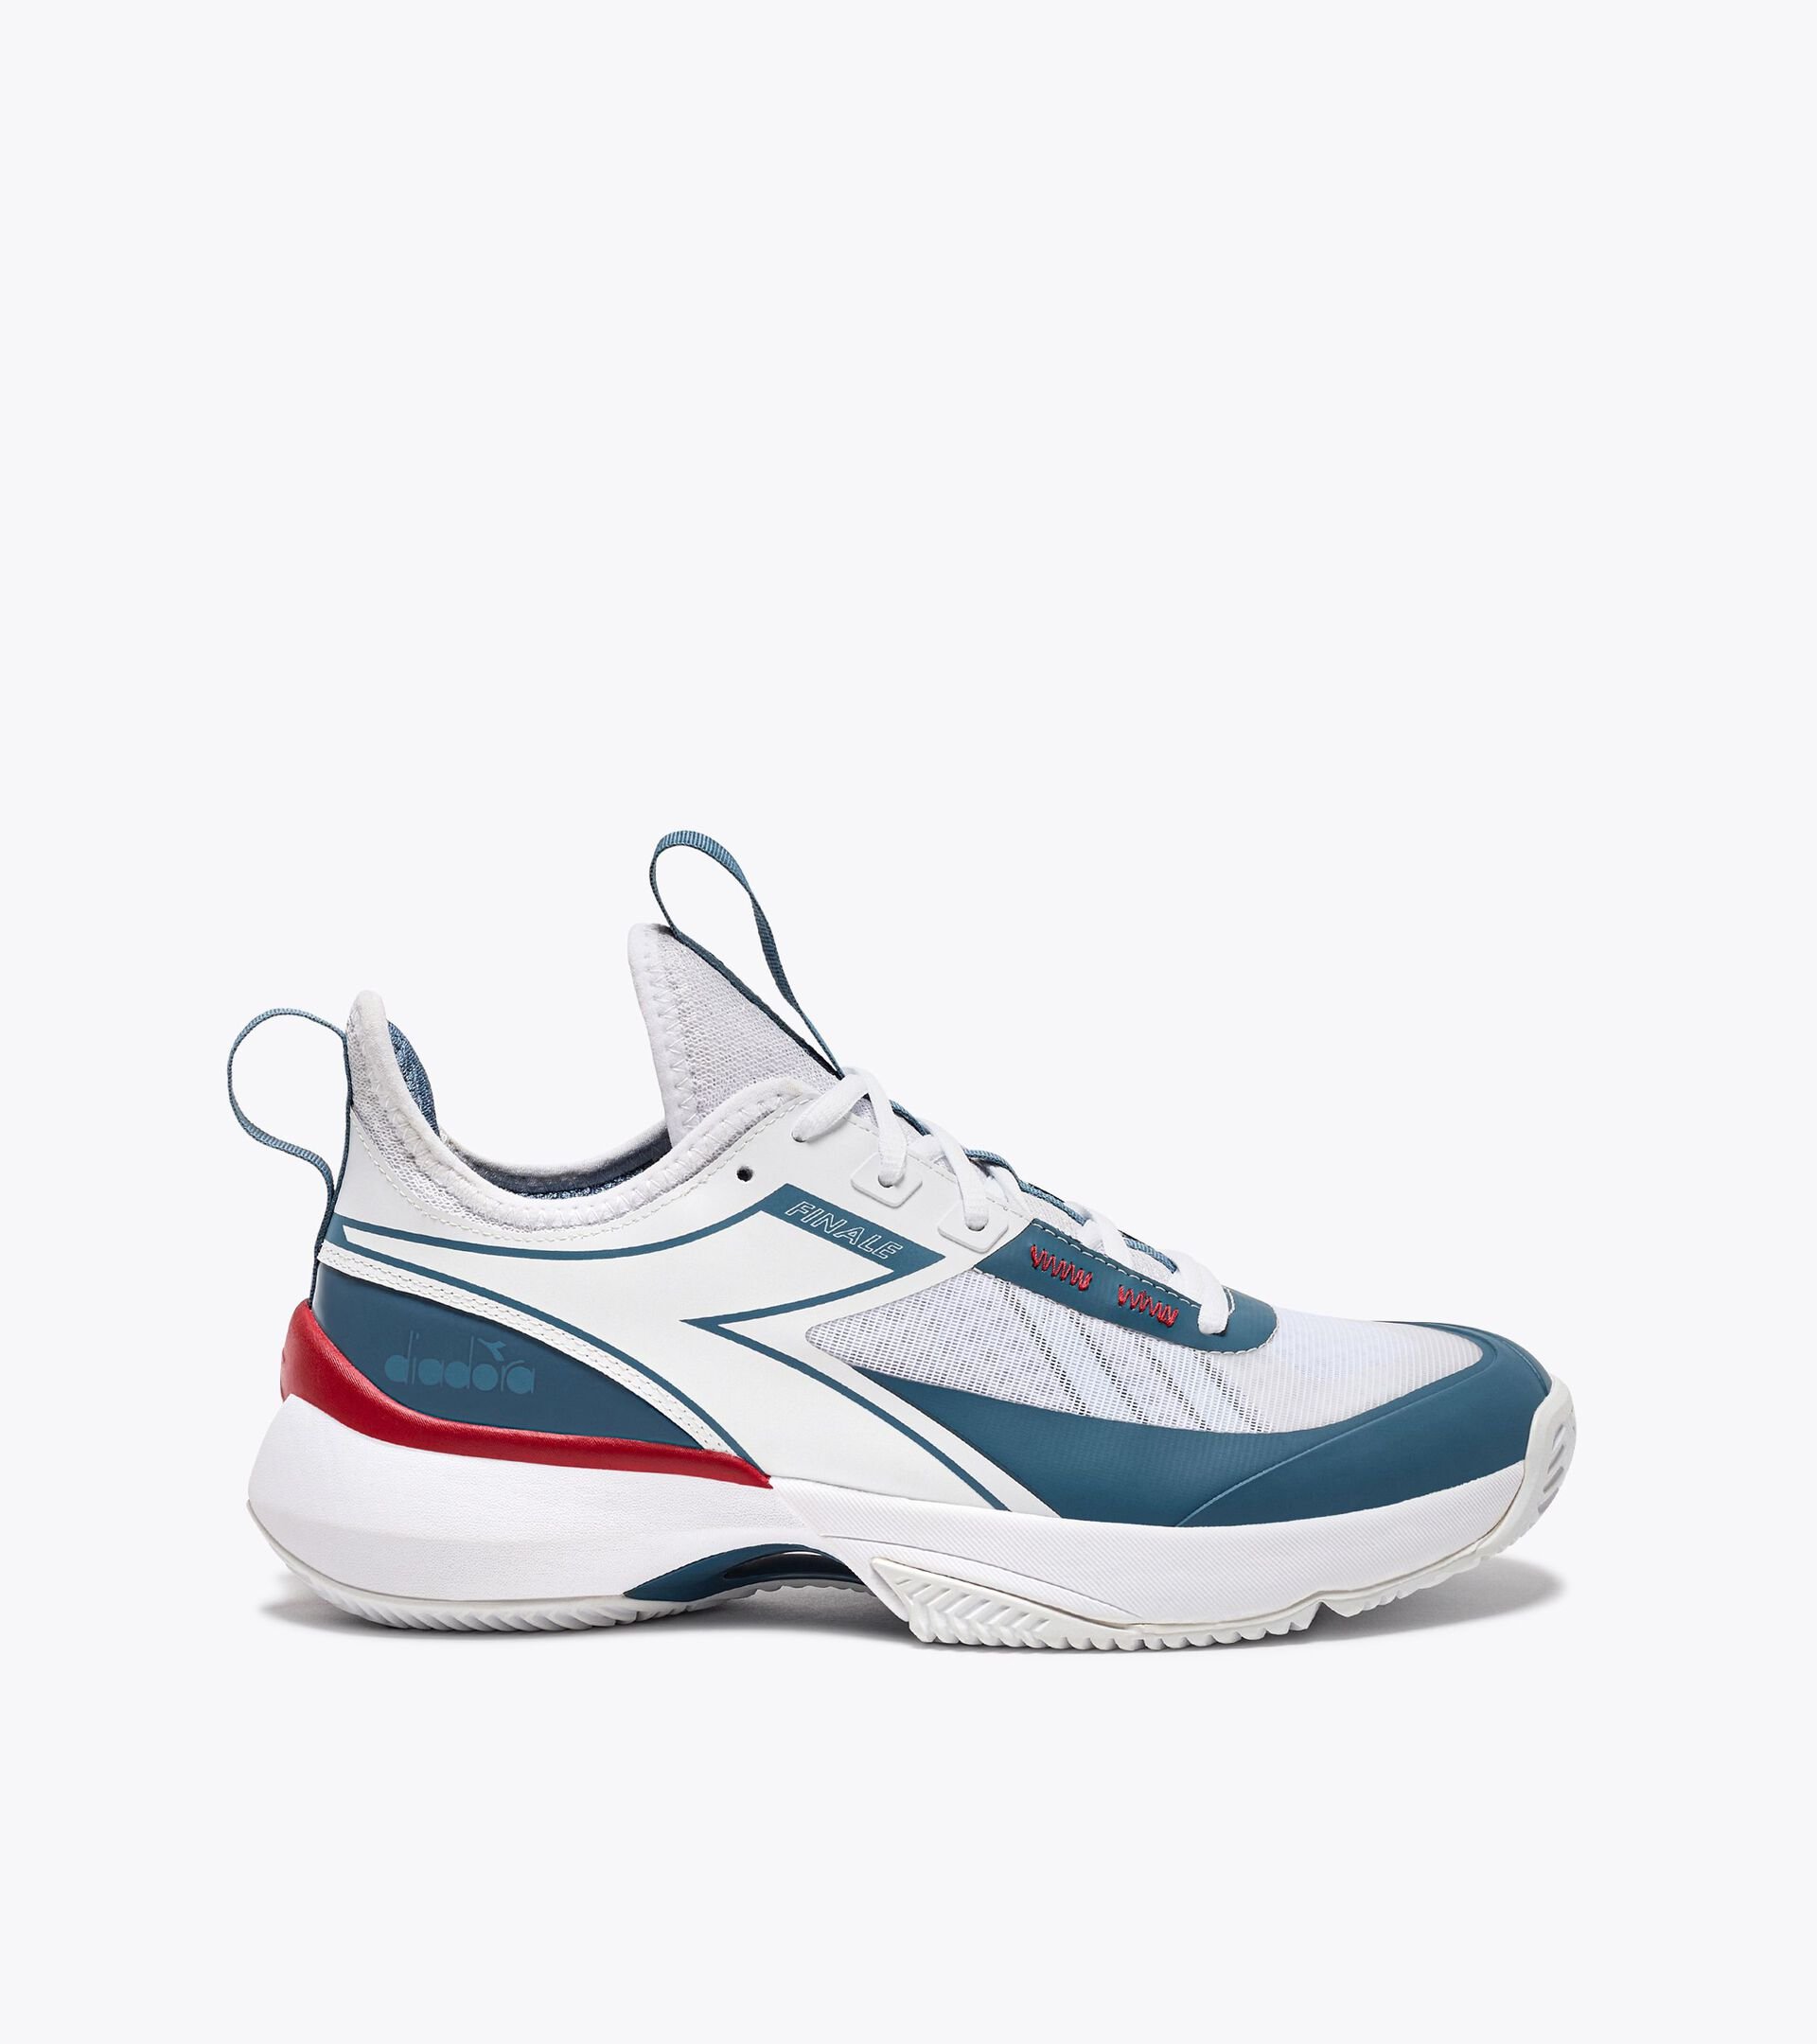 Tennis shoes for clay courts - Men FINALE CLAY WHITE/OCEANVIEW/SALSA - Diadora